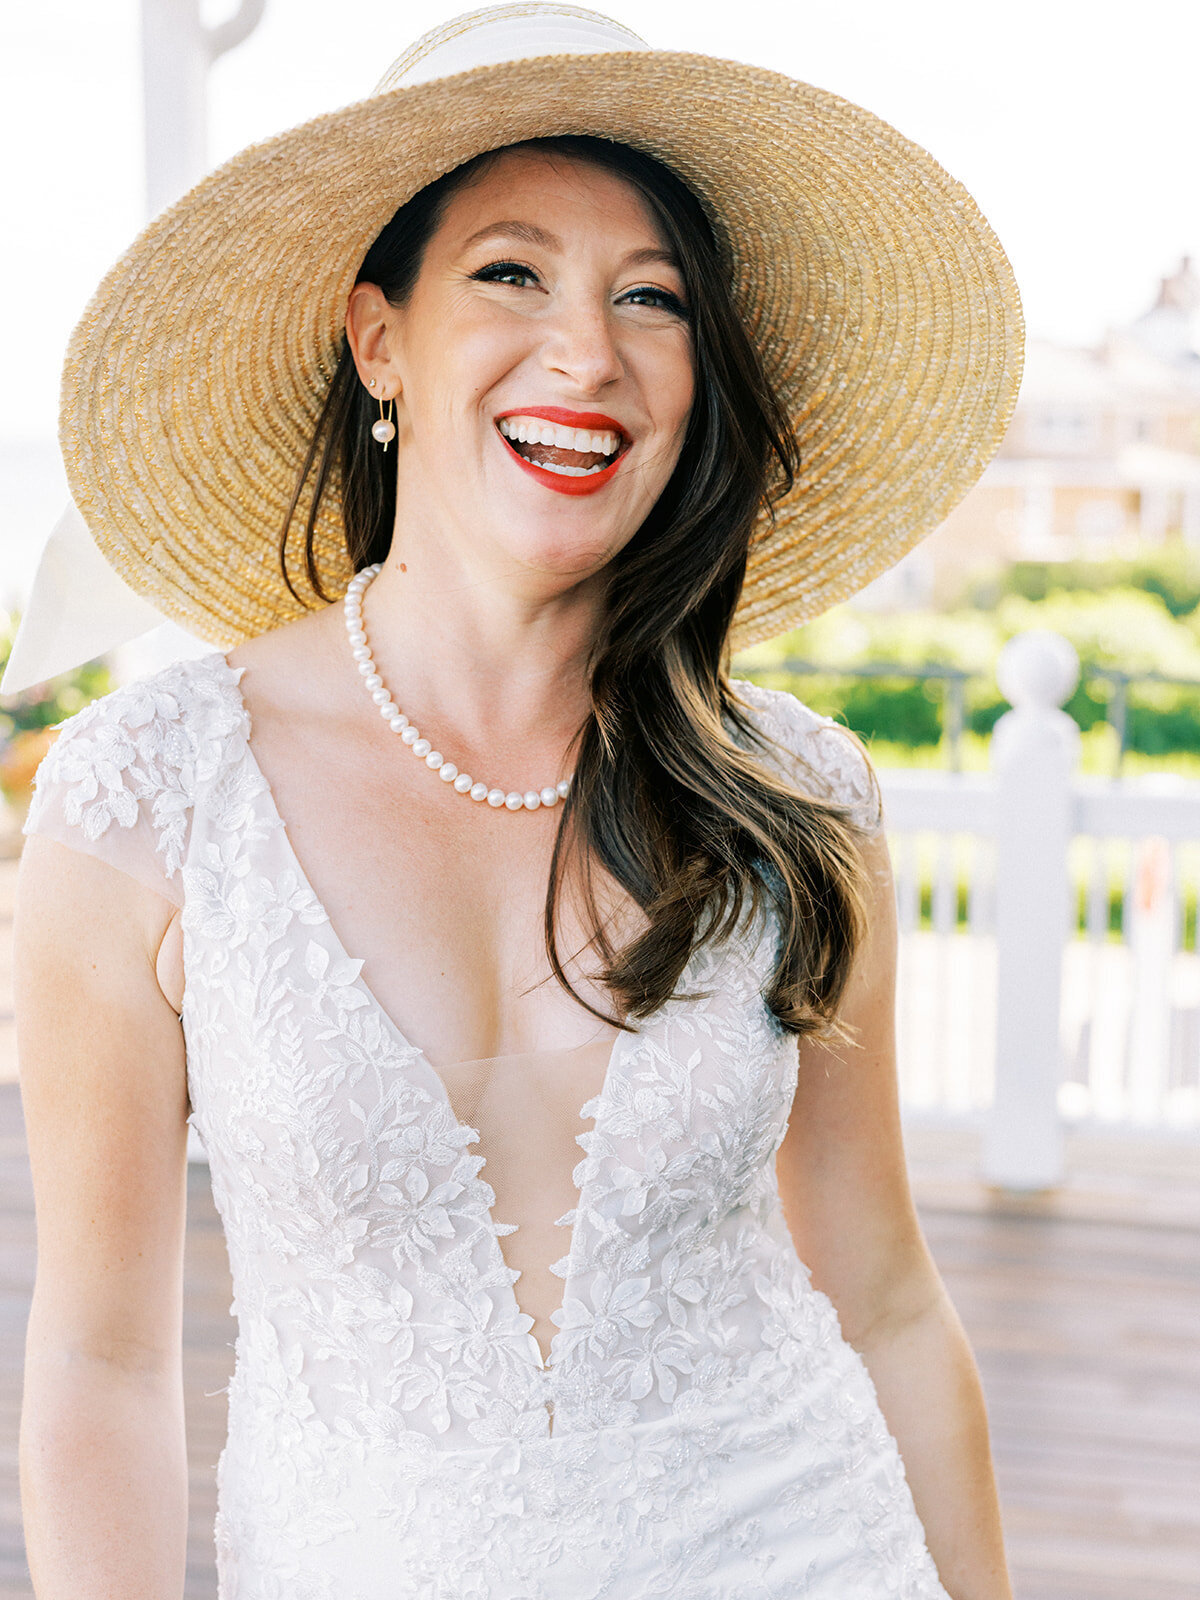 erica-renee-beauty-hair-and-makeup-duo-traveling-team-Ocean-House-Watch-Hill-Westerly-Wedding-Red-Lip-down-hairstyle-chic-modern-summer-bridal-hat-sun-hat